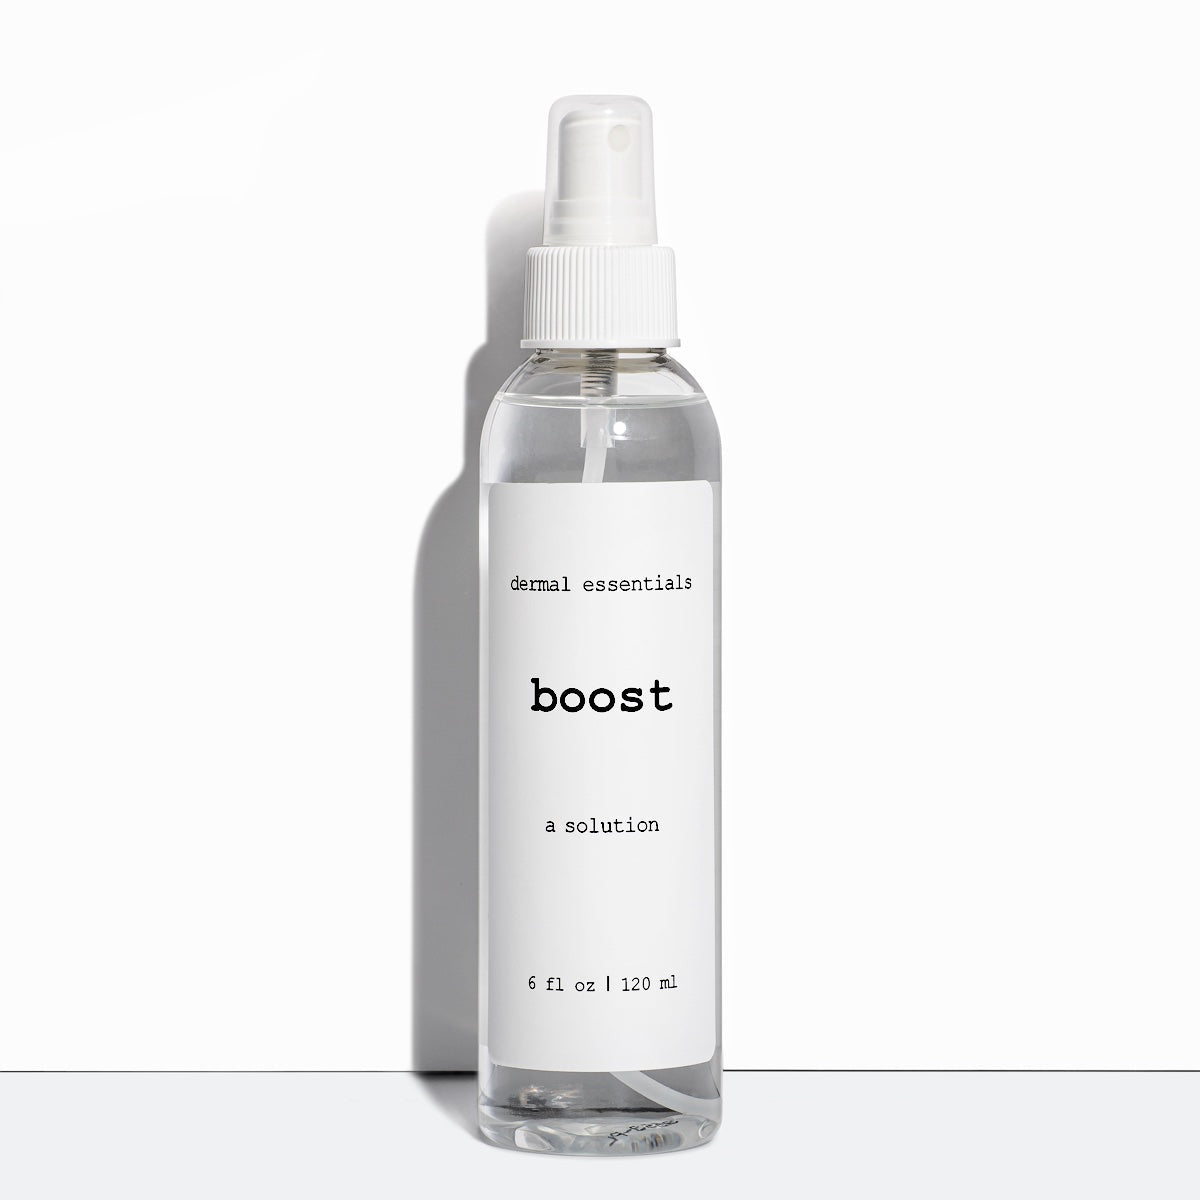 Full size 6 fl.oz. Clear cylinder plastic bottle white label black letters white spray nozzle clear plastic lid. Boost is a calming facial spray Dermal Essentials Medical Grade Skincare  . A mini size is 5 ml of this facial toner skincare product  in a white plastic pump bottle with black letters and clear lid.